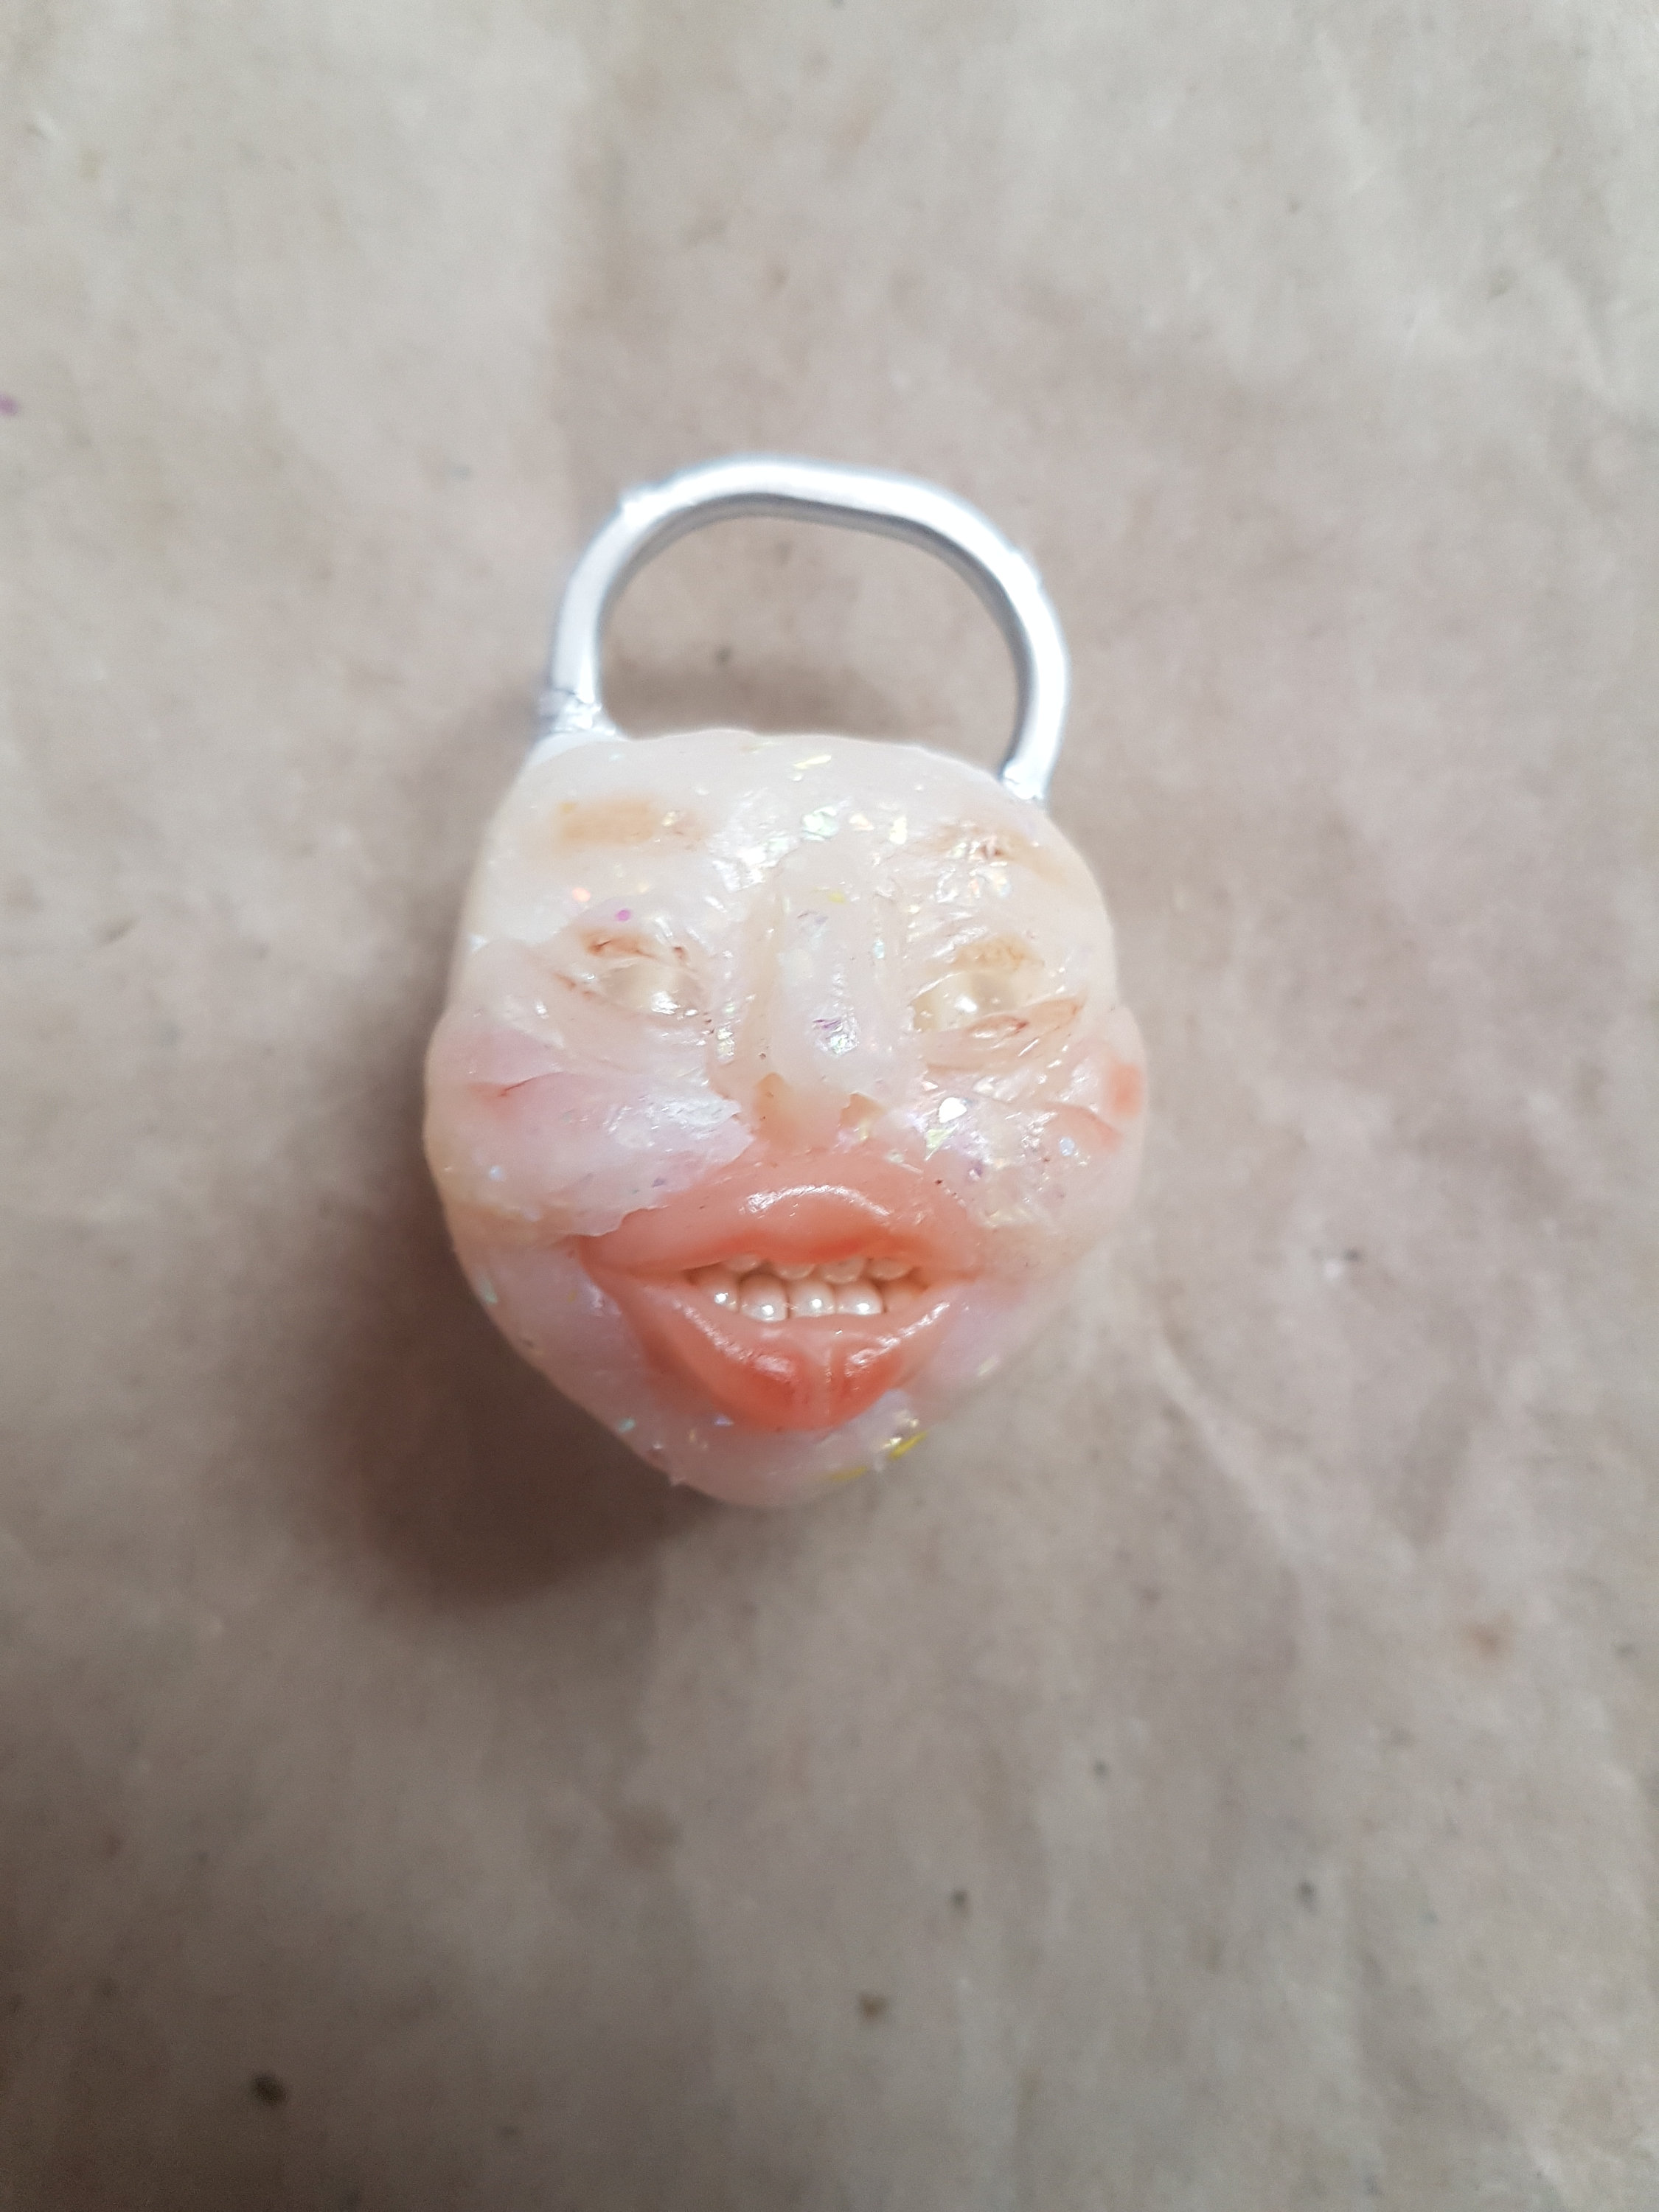 Trollface Meme Pendant necklace all materials (DFWNYRJK6) by MicroRealms